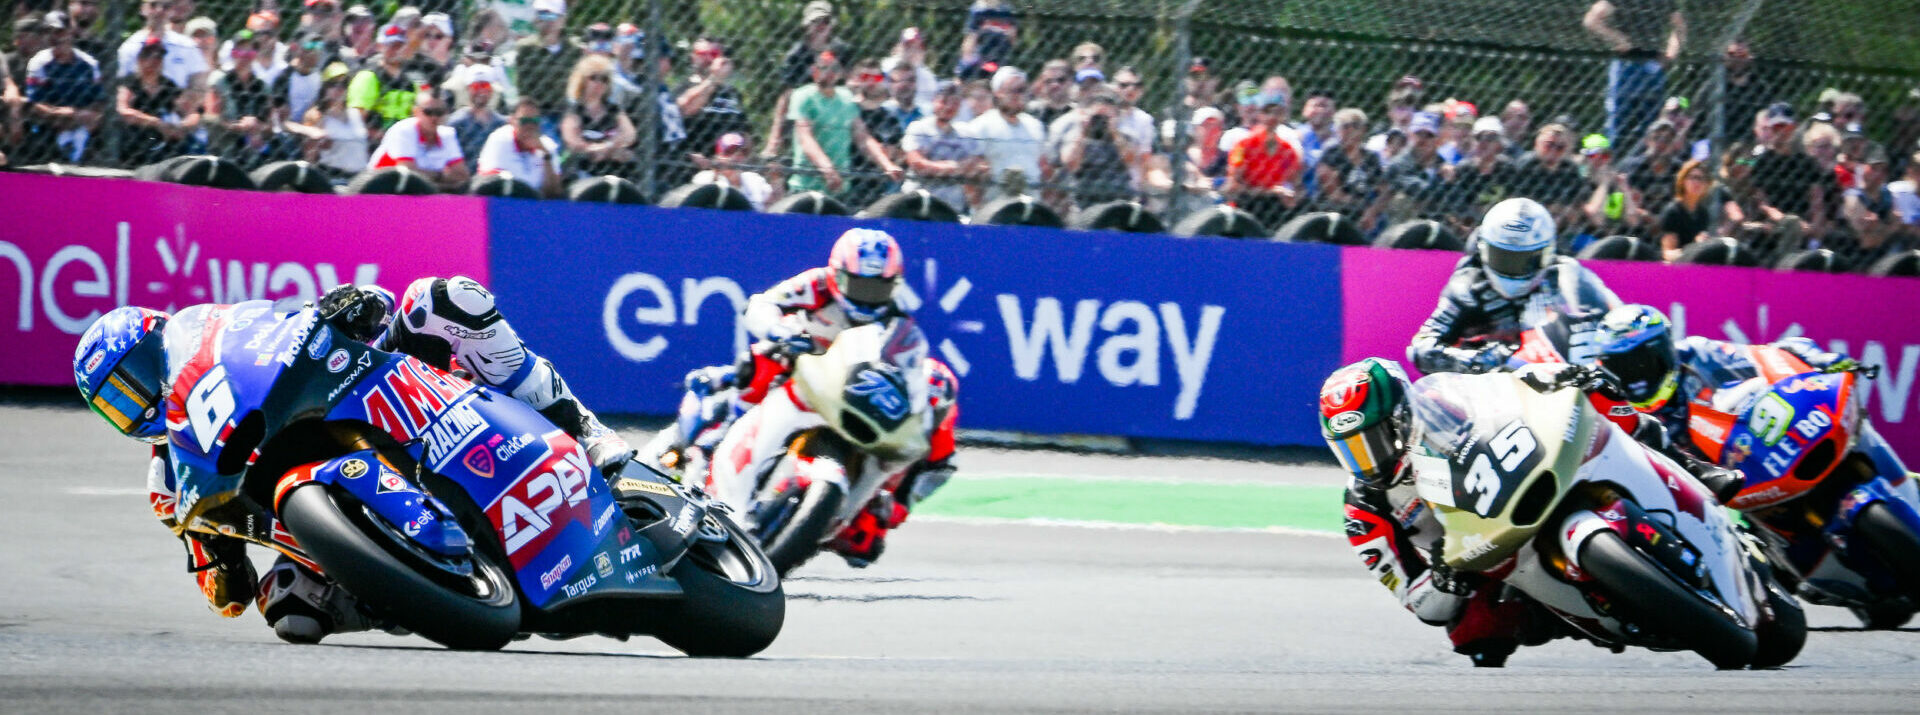 Cameron Beaubier (6) went from 16th to ninth on the first lap of the Moto2 race at Le Mans, passing Somkiat Chantra (35), Jorge Navarra (9), Marcel Schrotter (23), and Ai Ogura (79) along the way. Photo courtesy American Racing Team.